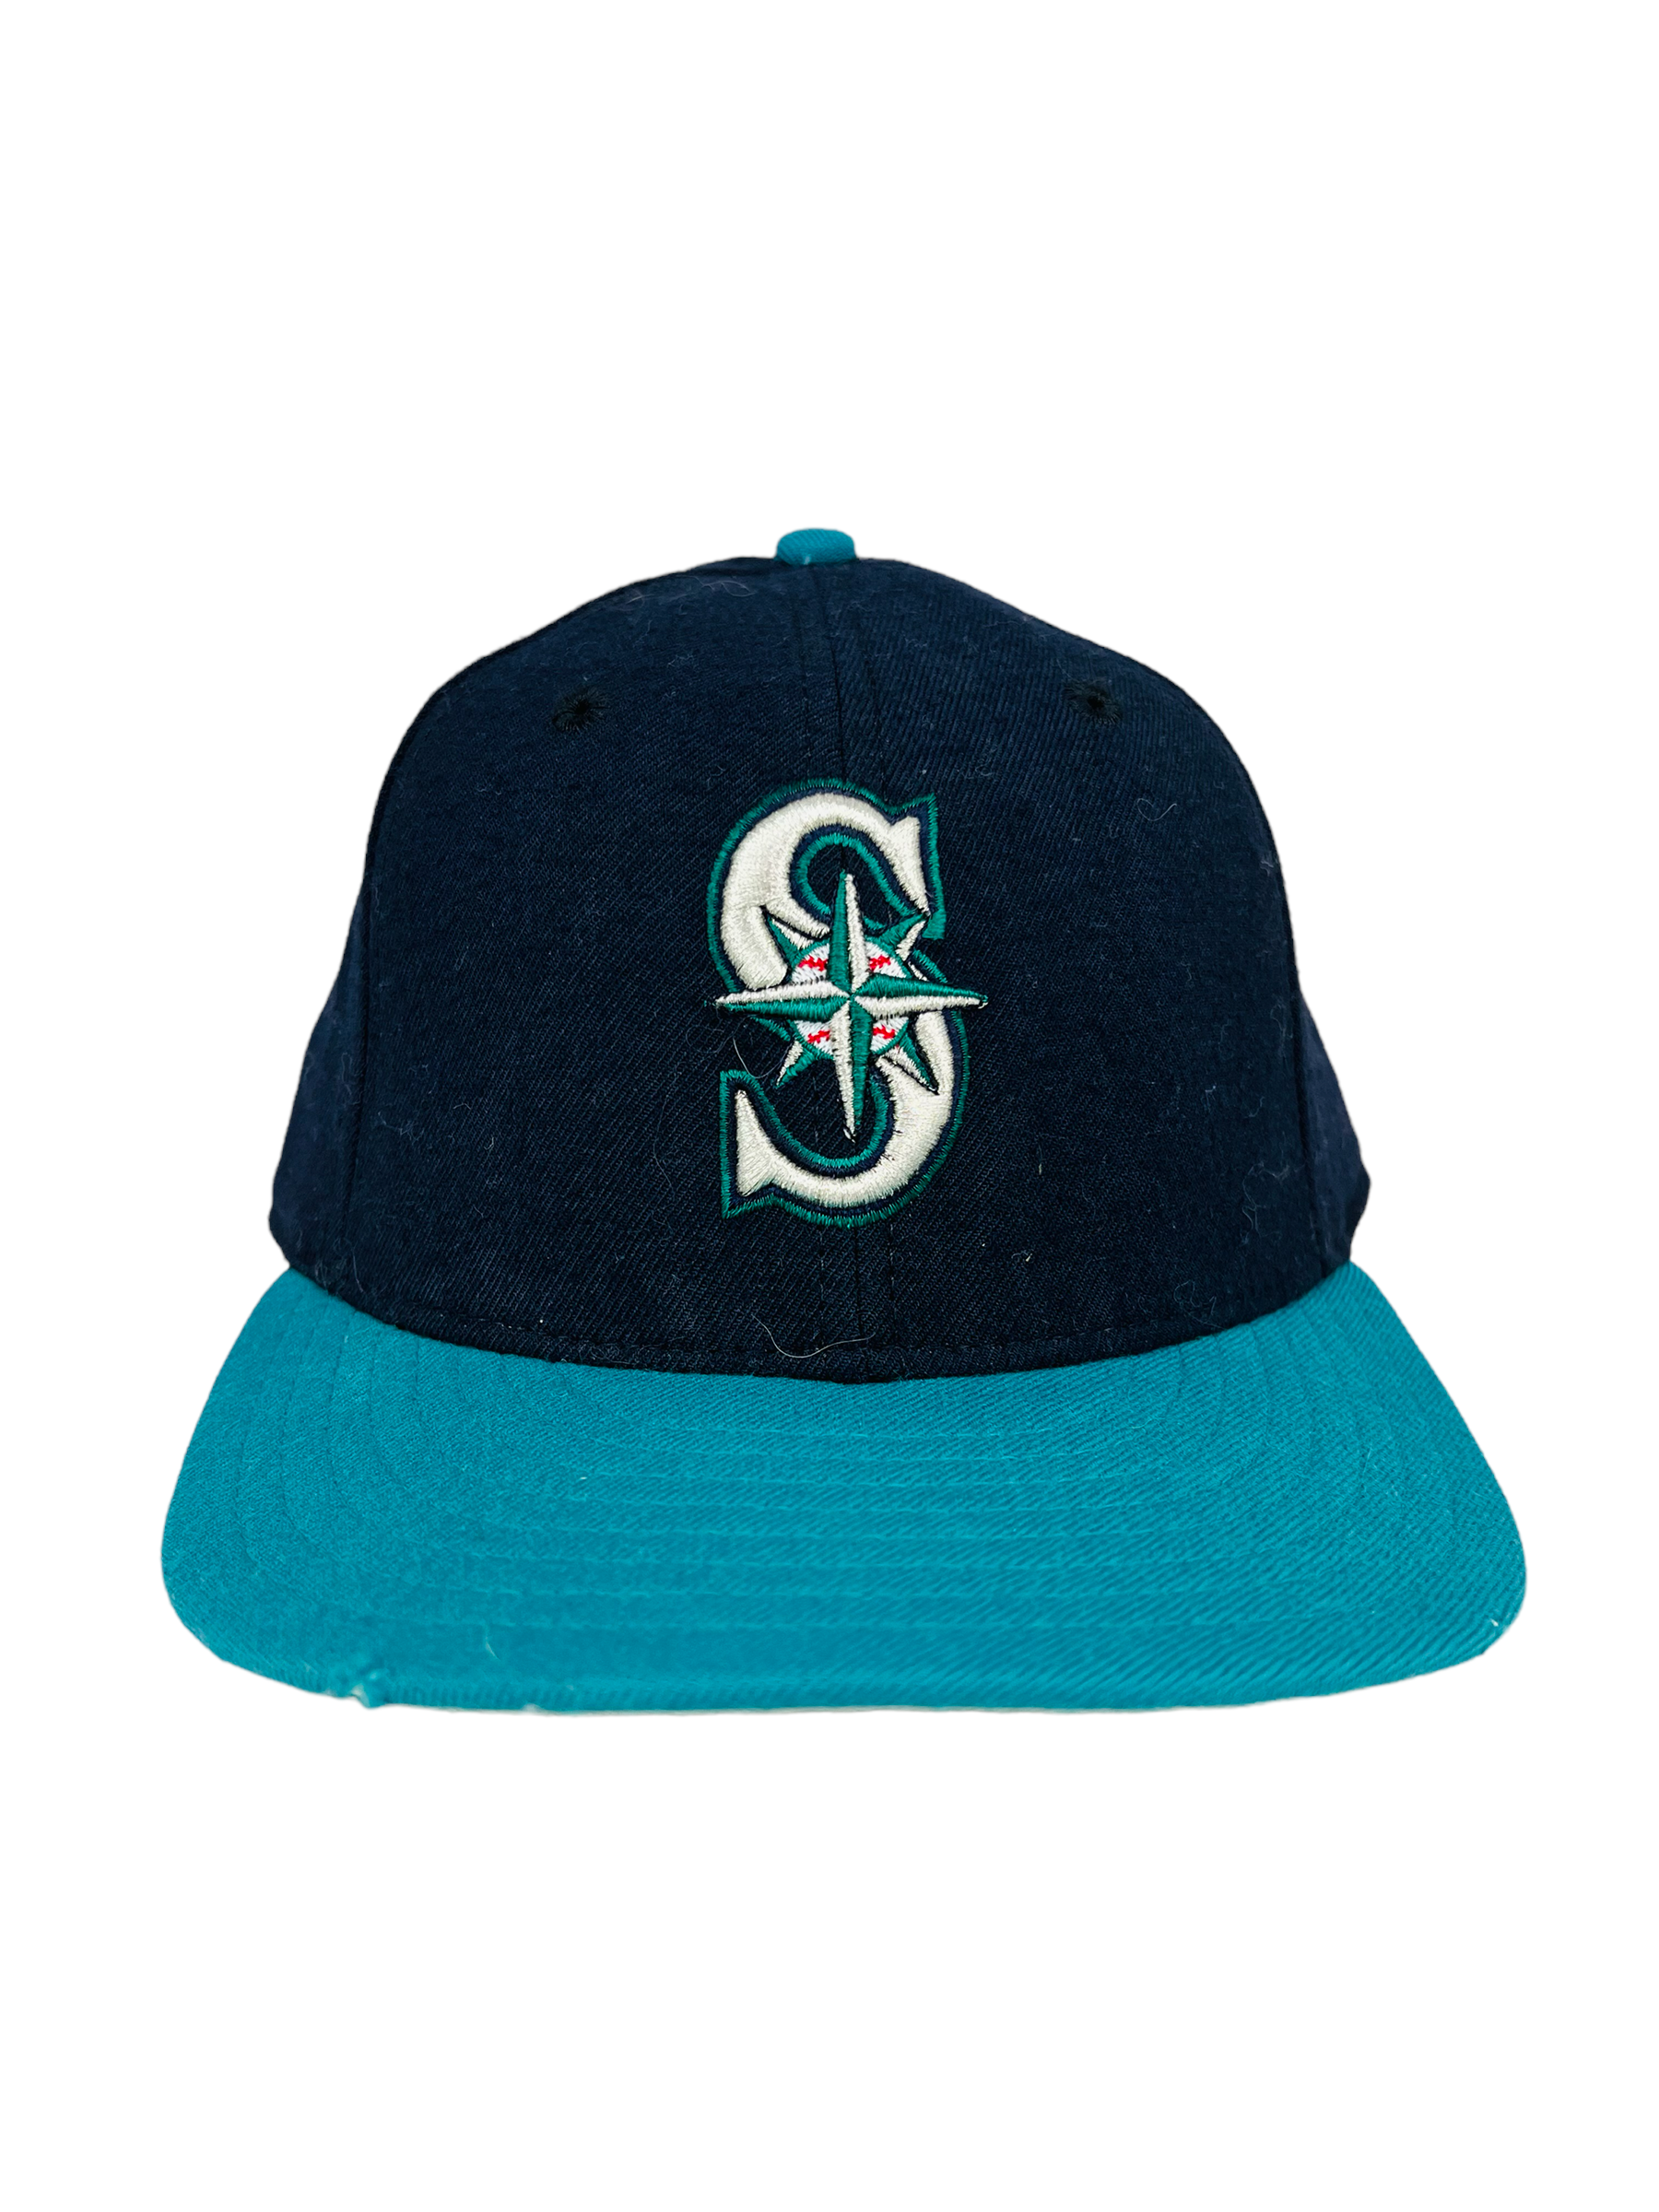 seattle mariners hat history